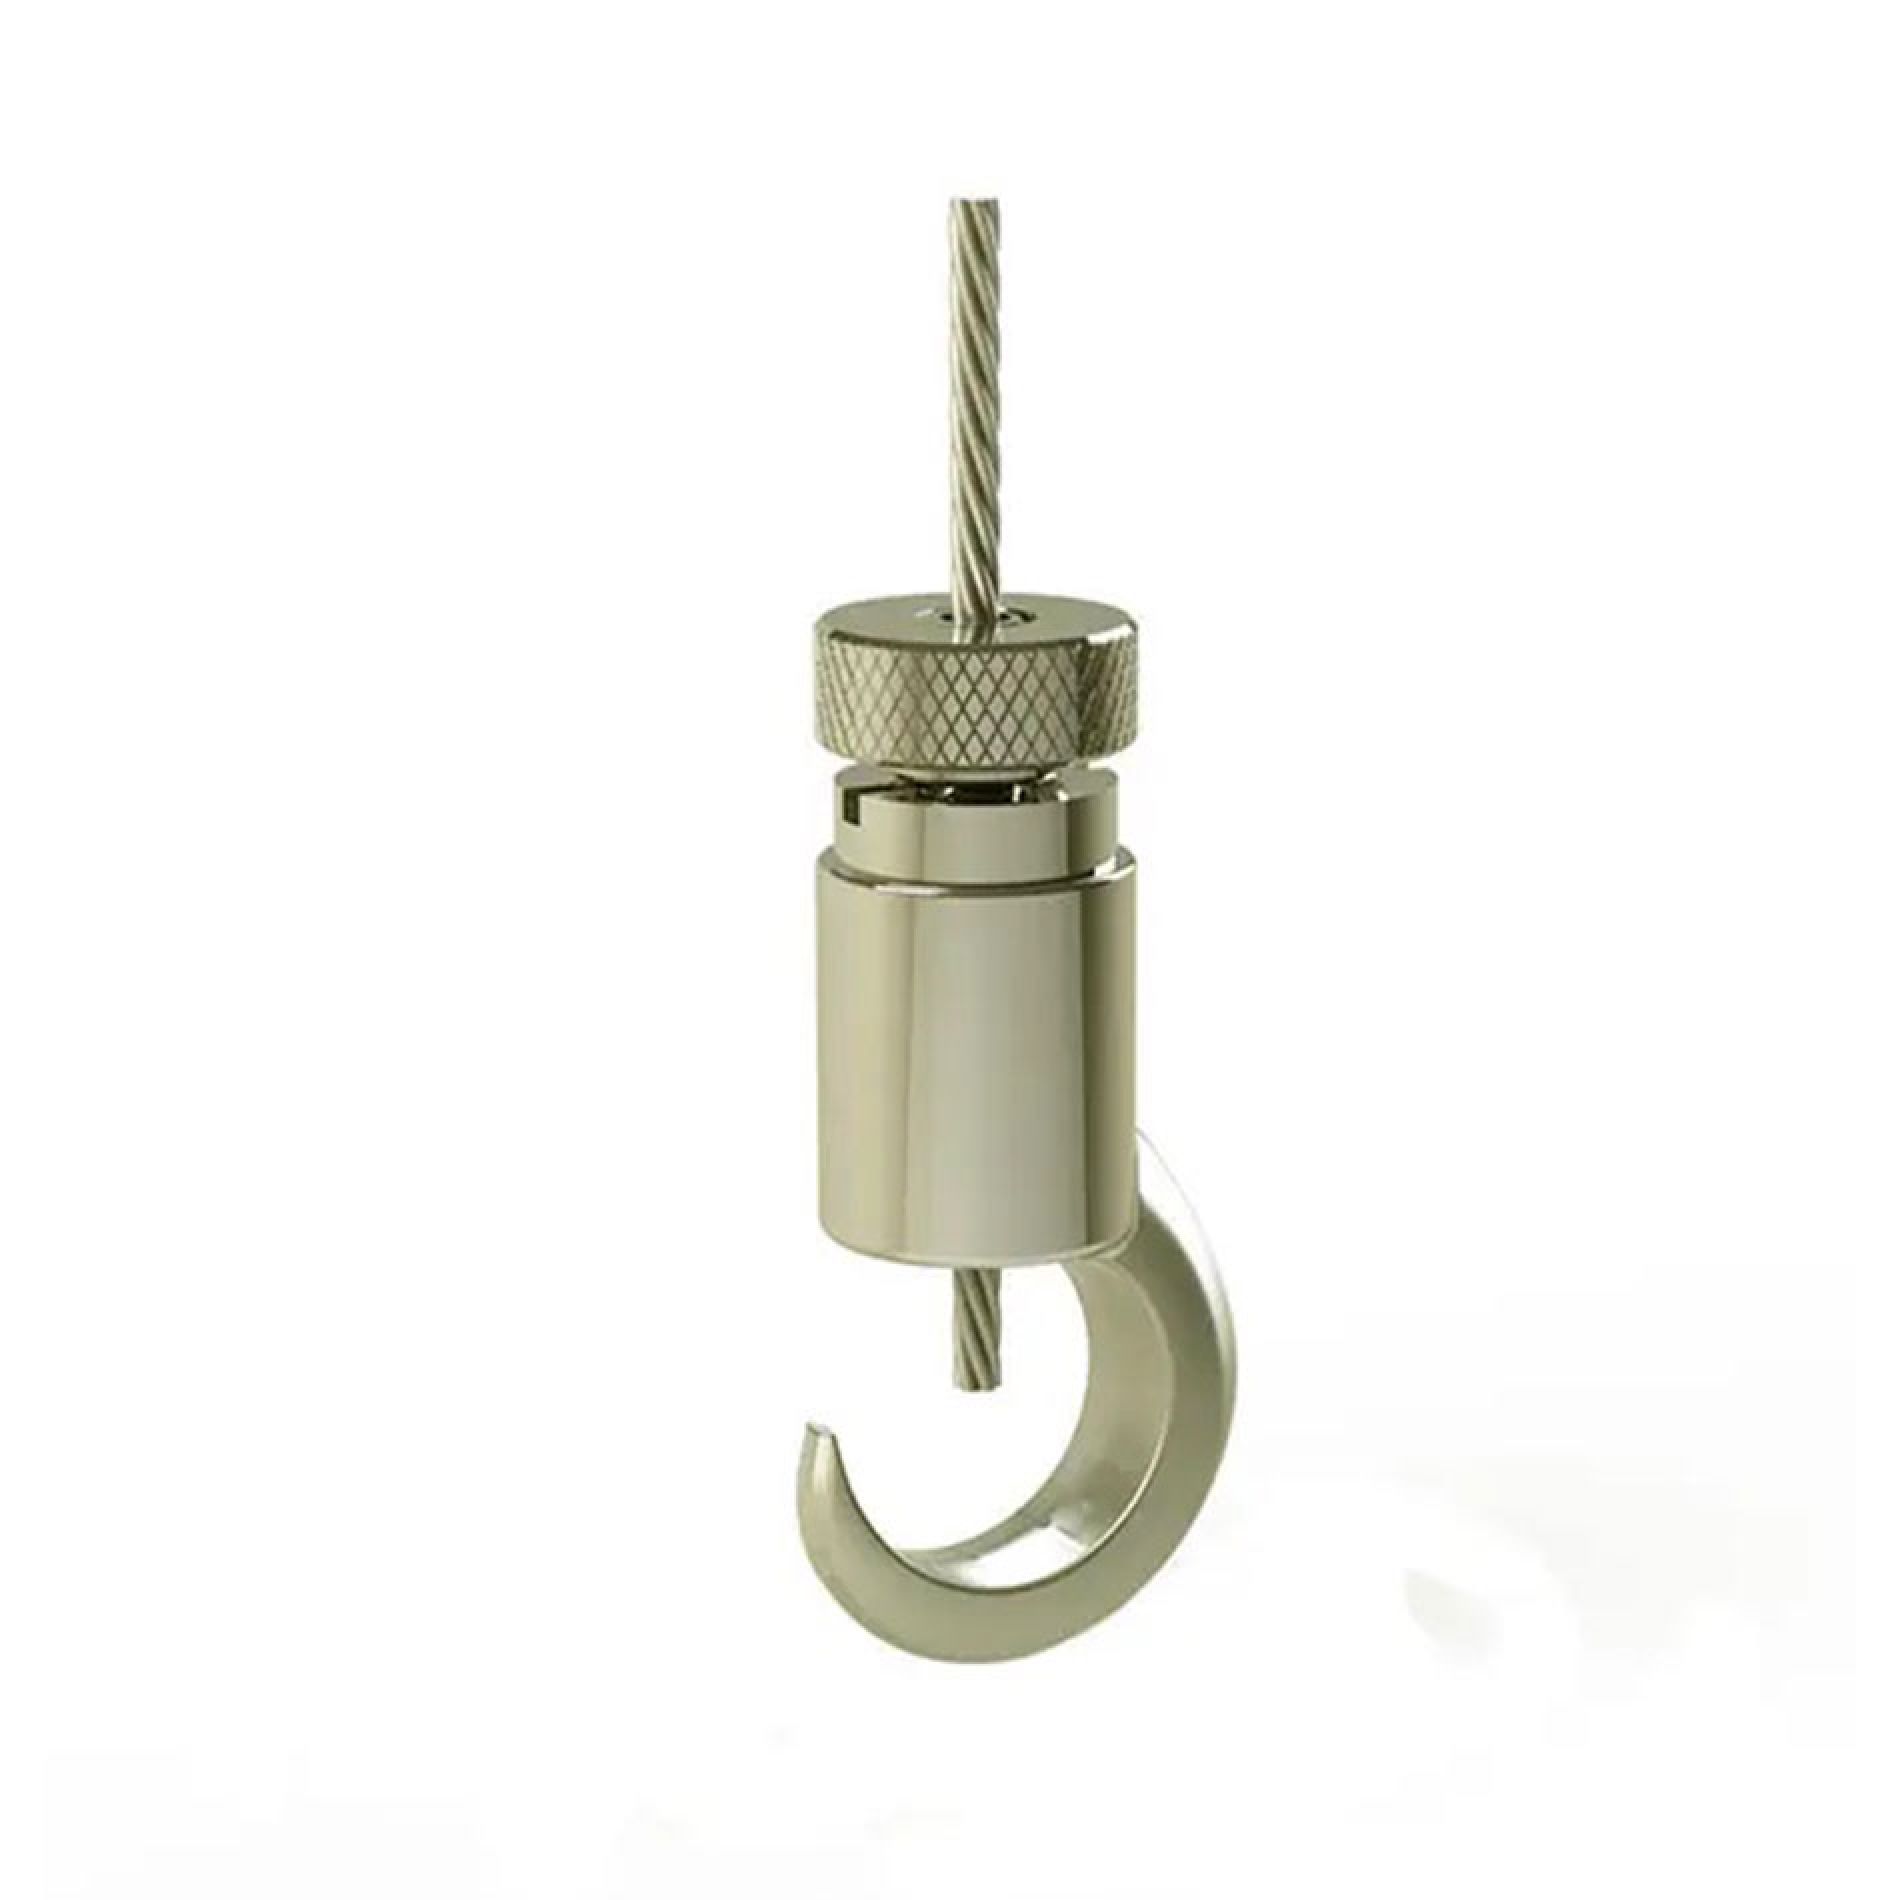 DG-TNS-JU-APLT-SAT: Jointed Tensioning Gripper with Anchor Plate Gallery Image